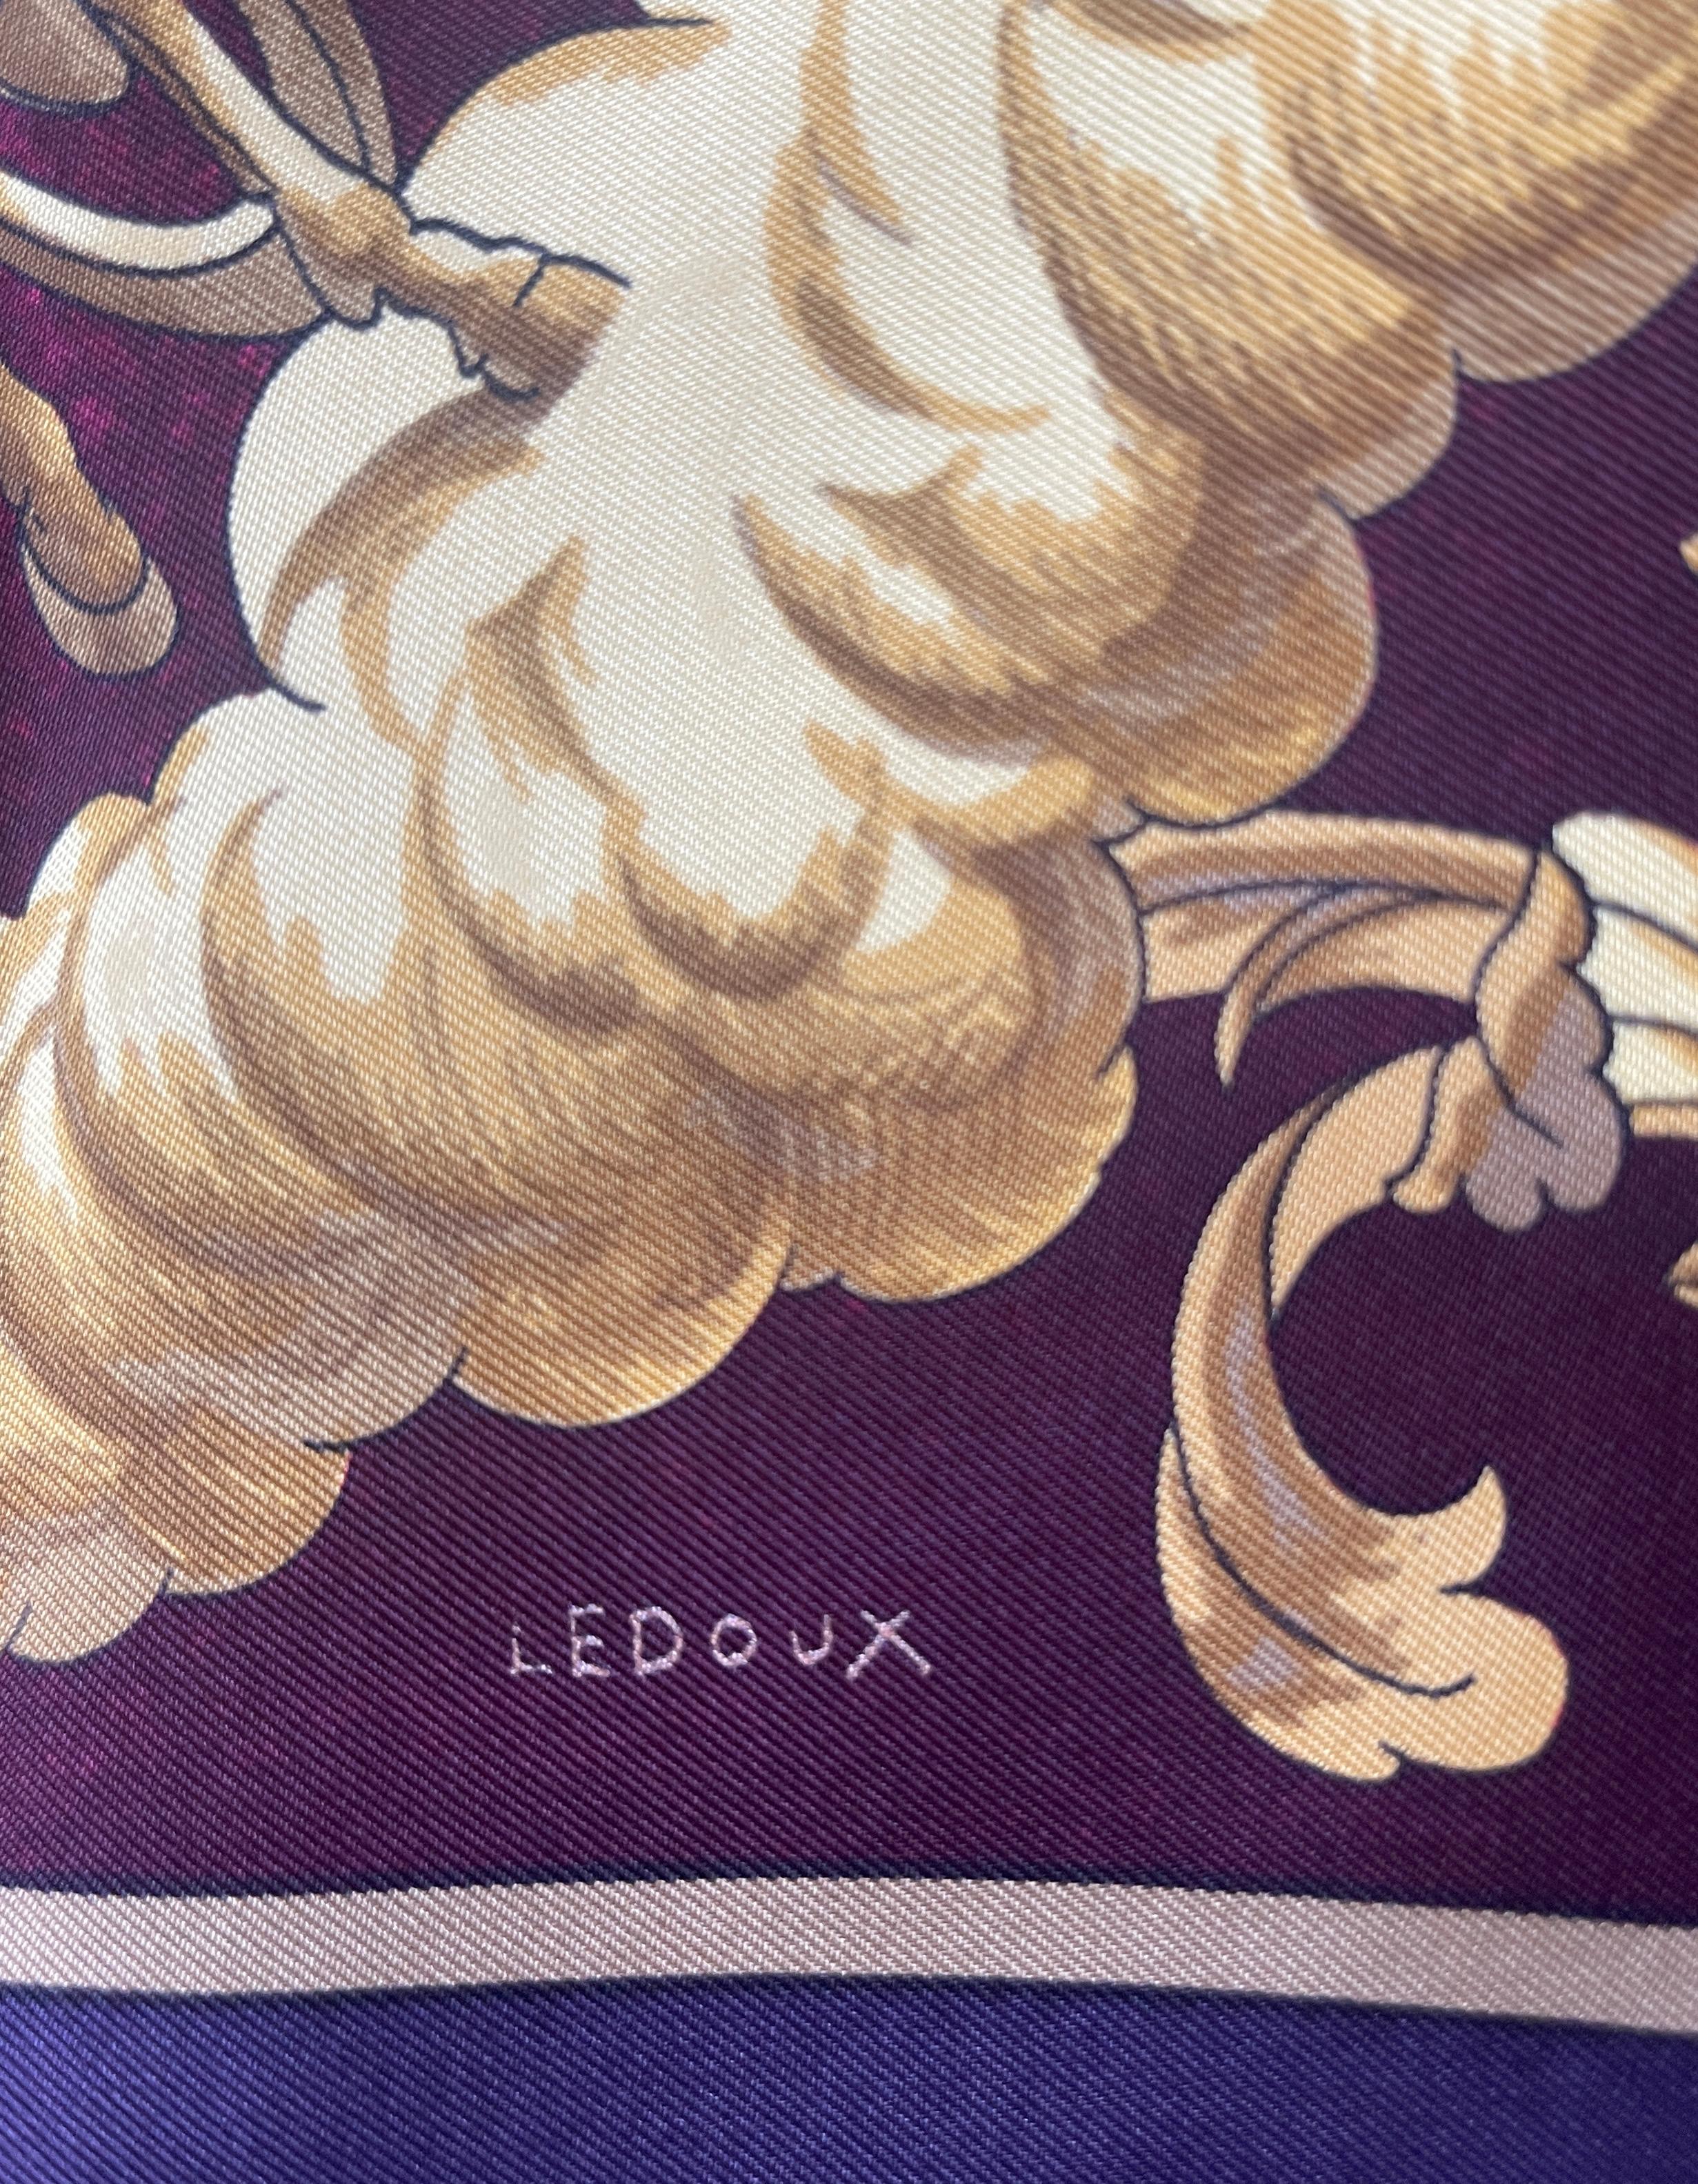 Hermes Bordeaux Cosmos 90cm Silk Scarf designed by Philippe Ledoux For Sale 1